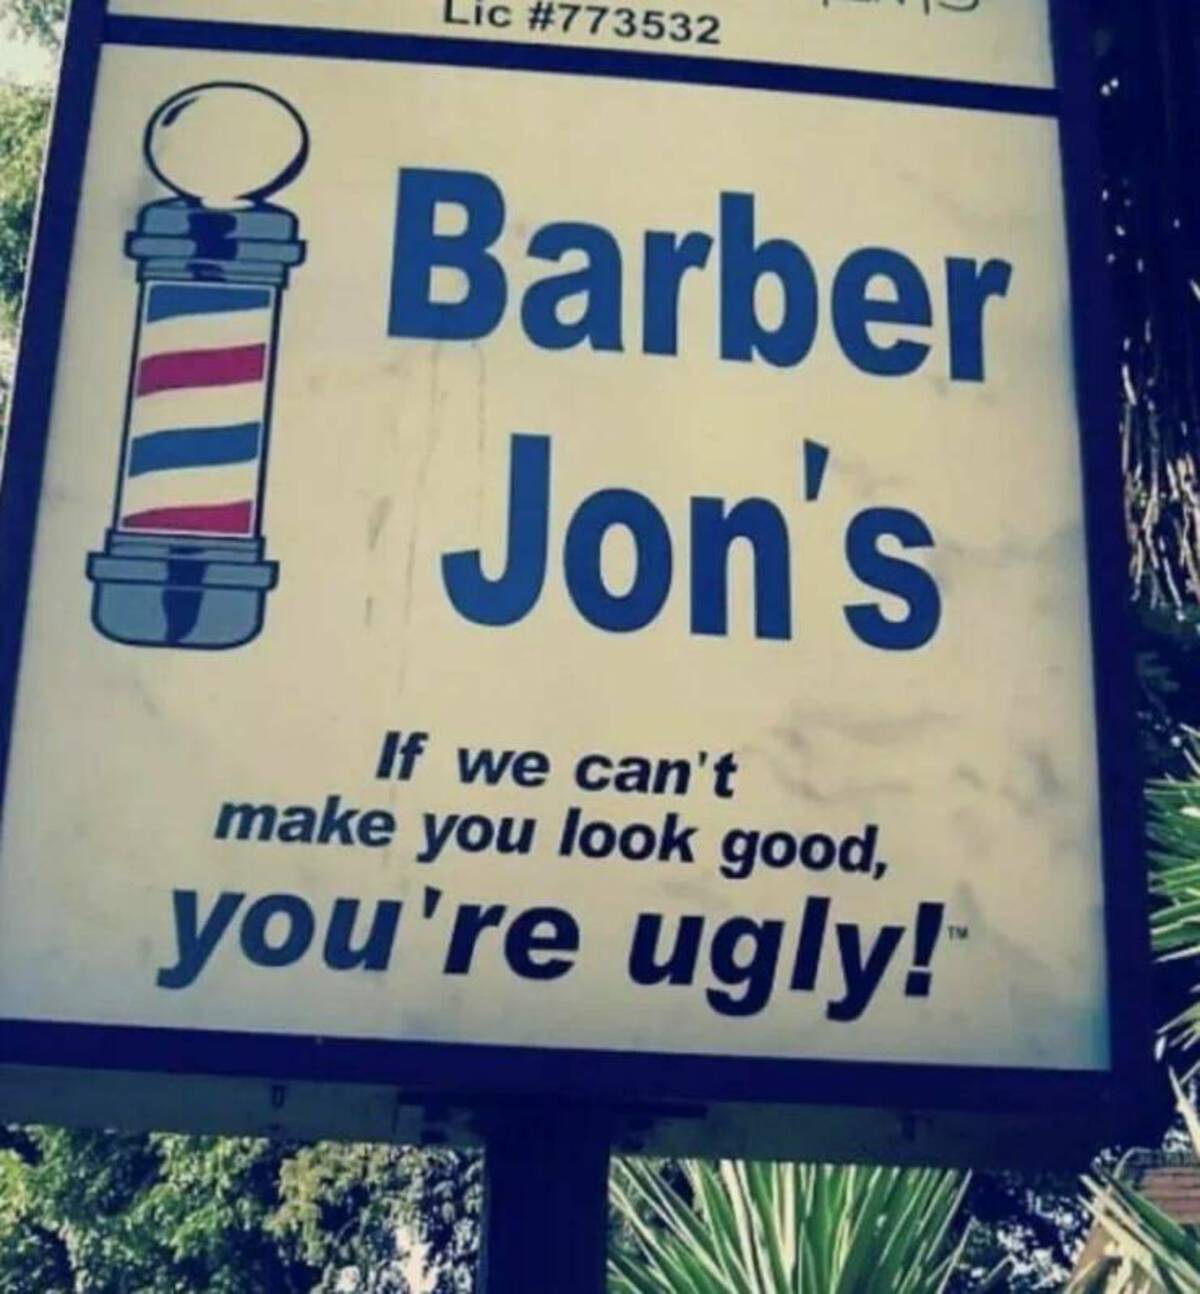 signage - a Lic Barber Jon's If we can't make you look good, you're ugly!